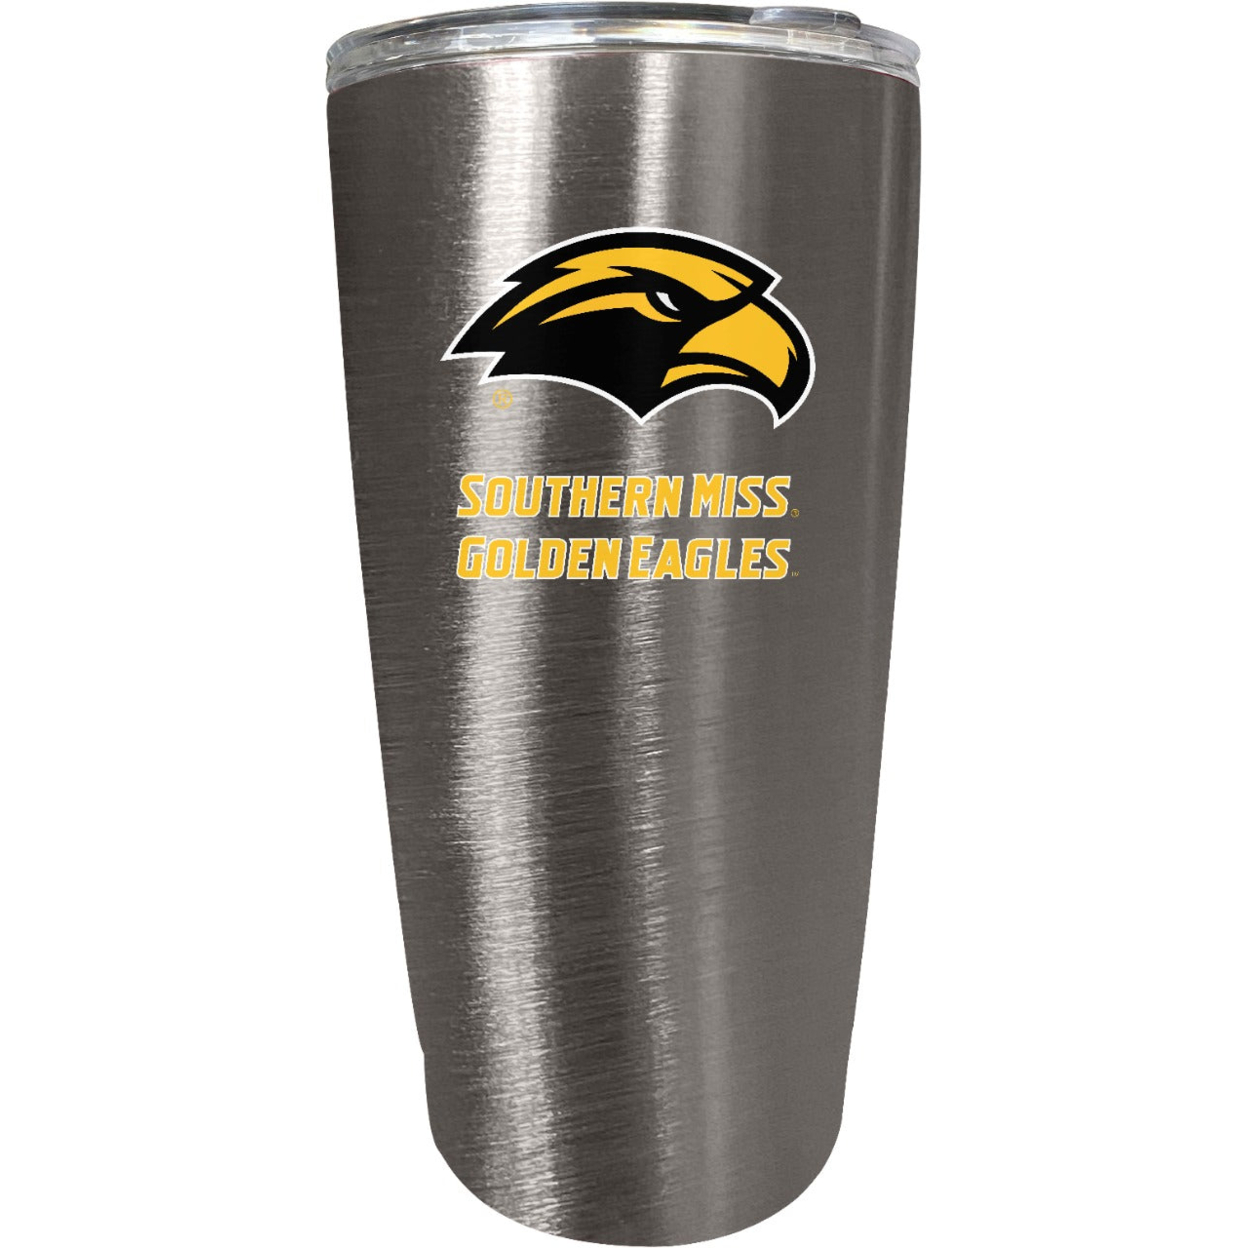 Southern Mississippi Golden Eagles 16 Oz Insulated Stainless Steel Tumbler Colorless